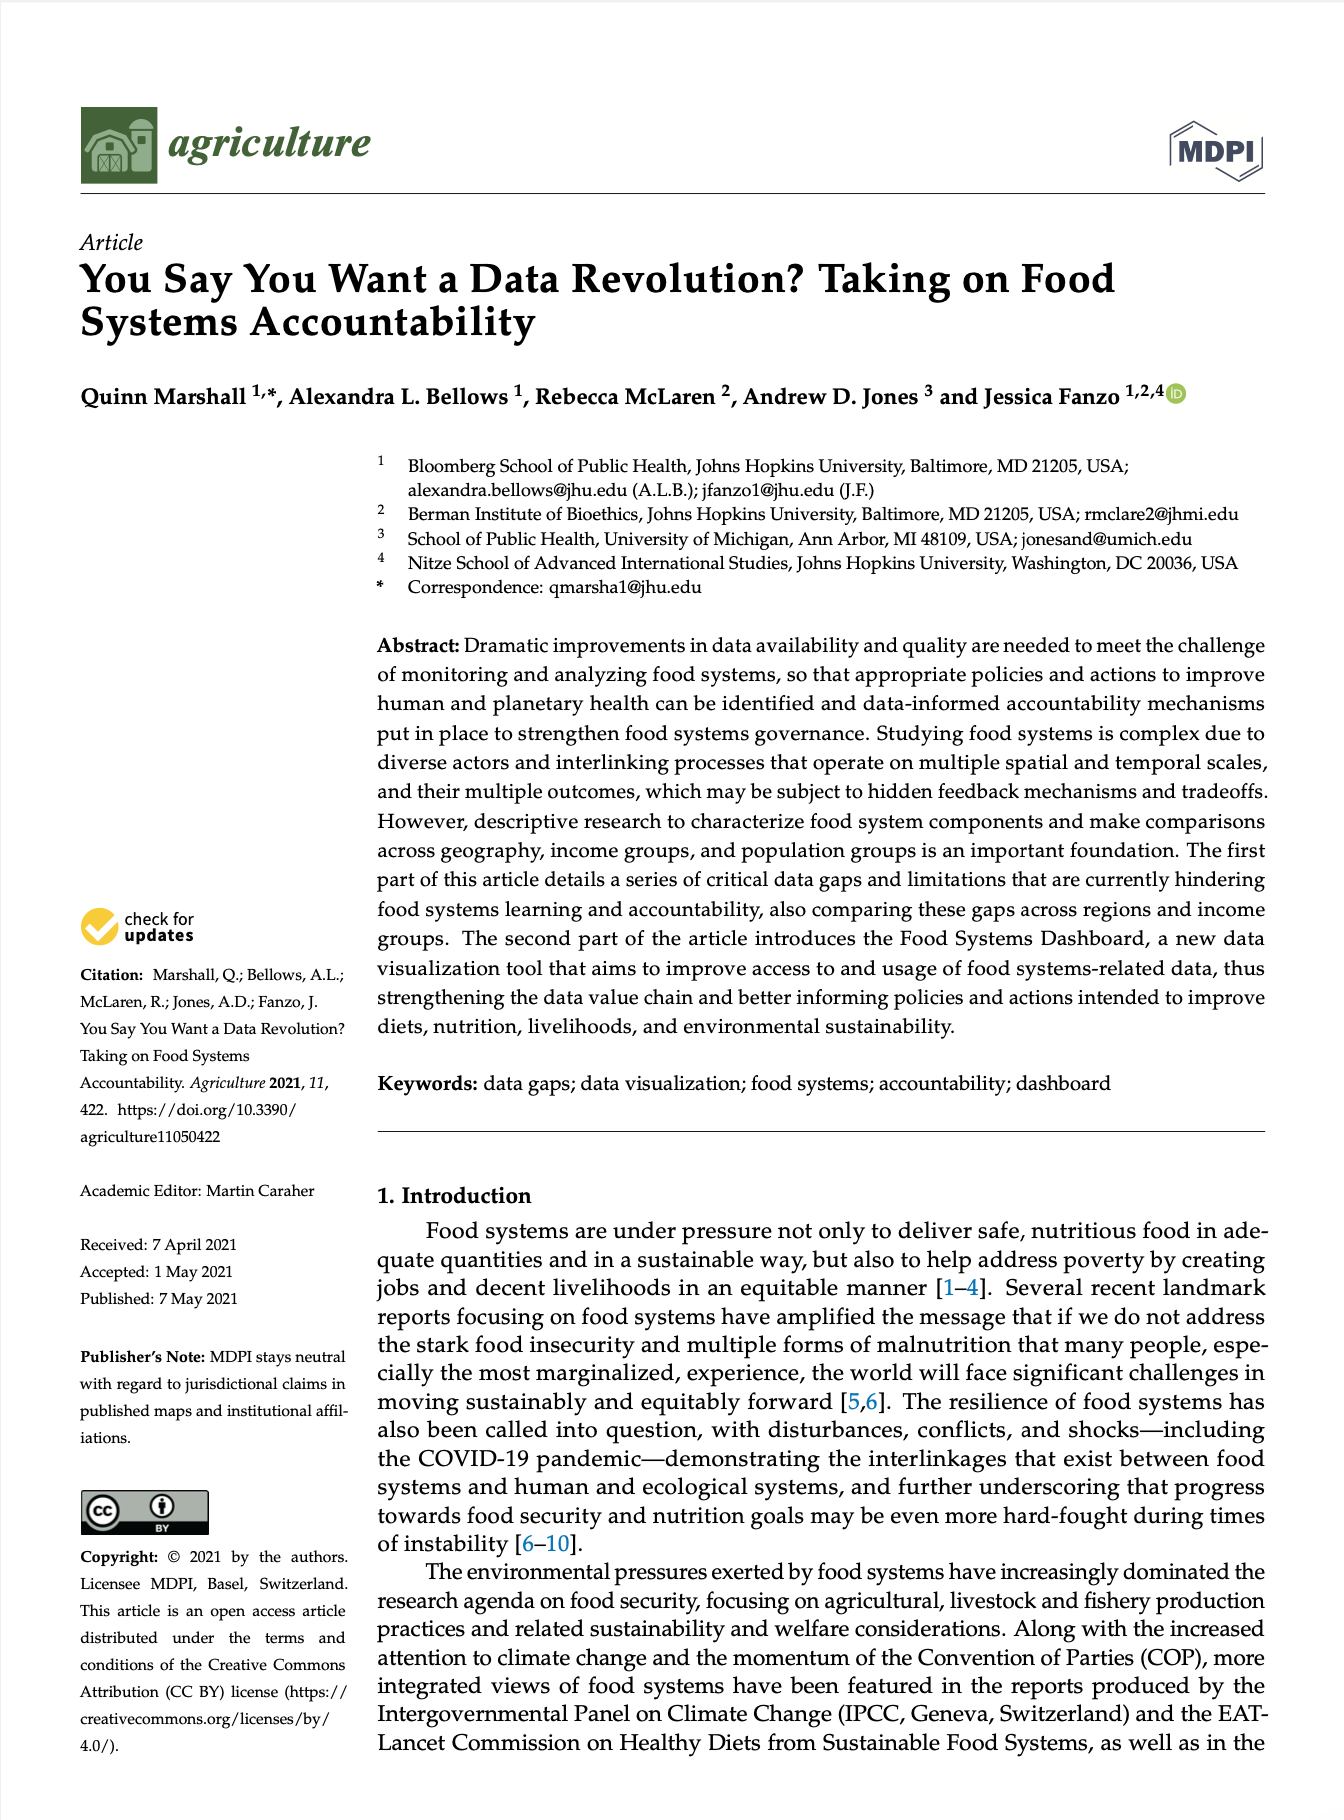 You Say You Want a Data Revolution? Taking on Food Systems Accountability